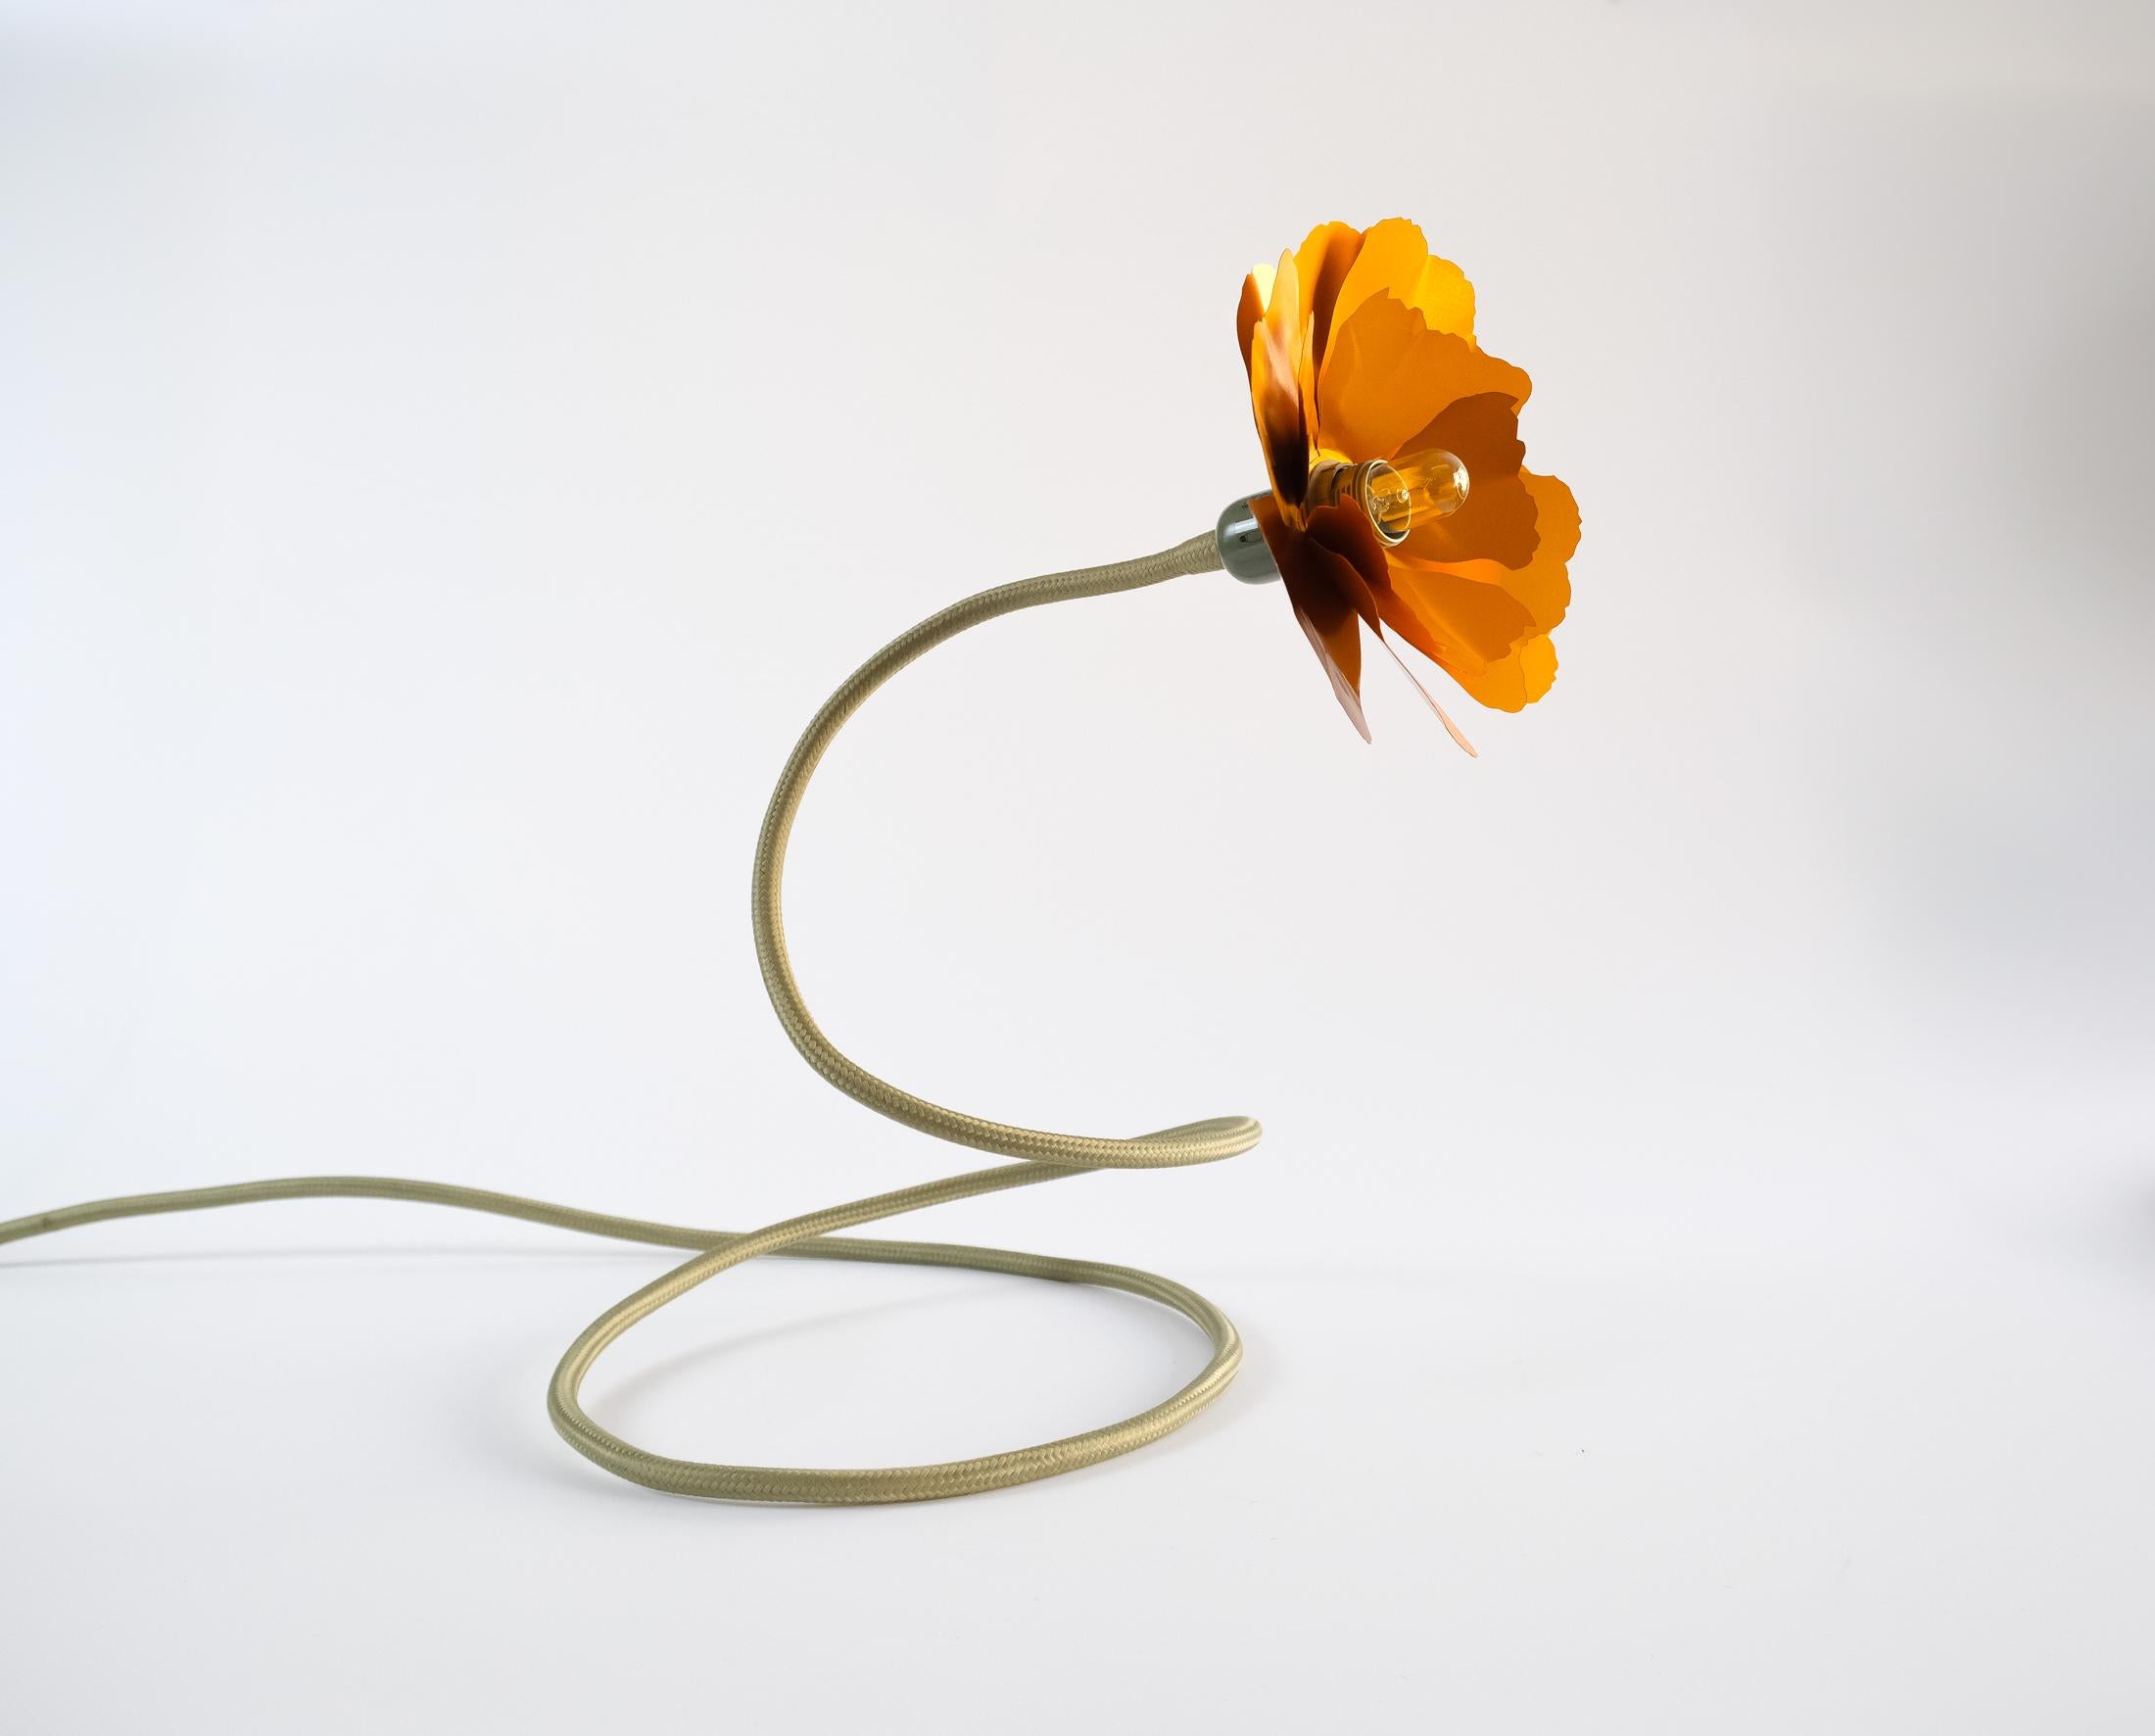 Helena Christensen's Flexible Flower Lamp for Habitat “V.I.P” Collection, 2004 In Good Condition For Sale In London, GB